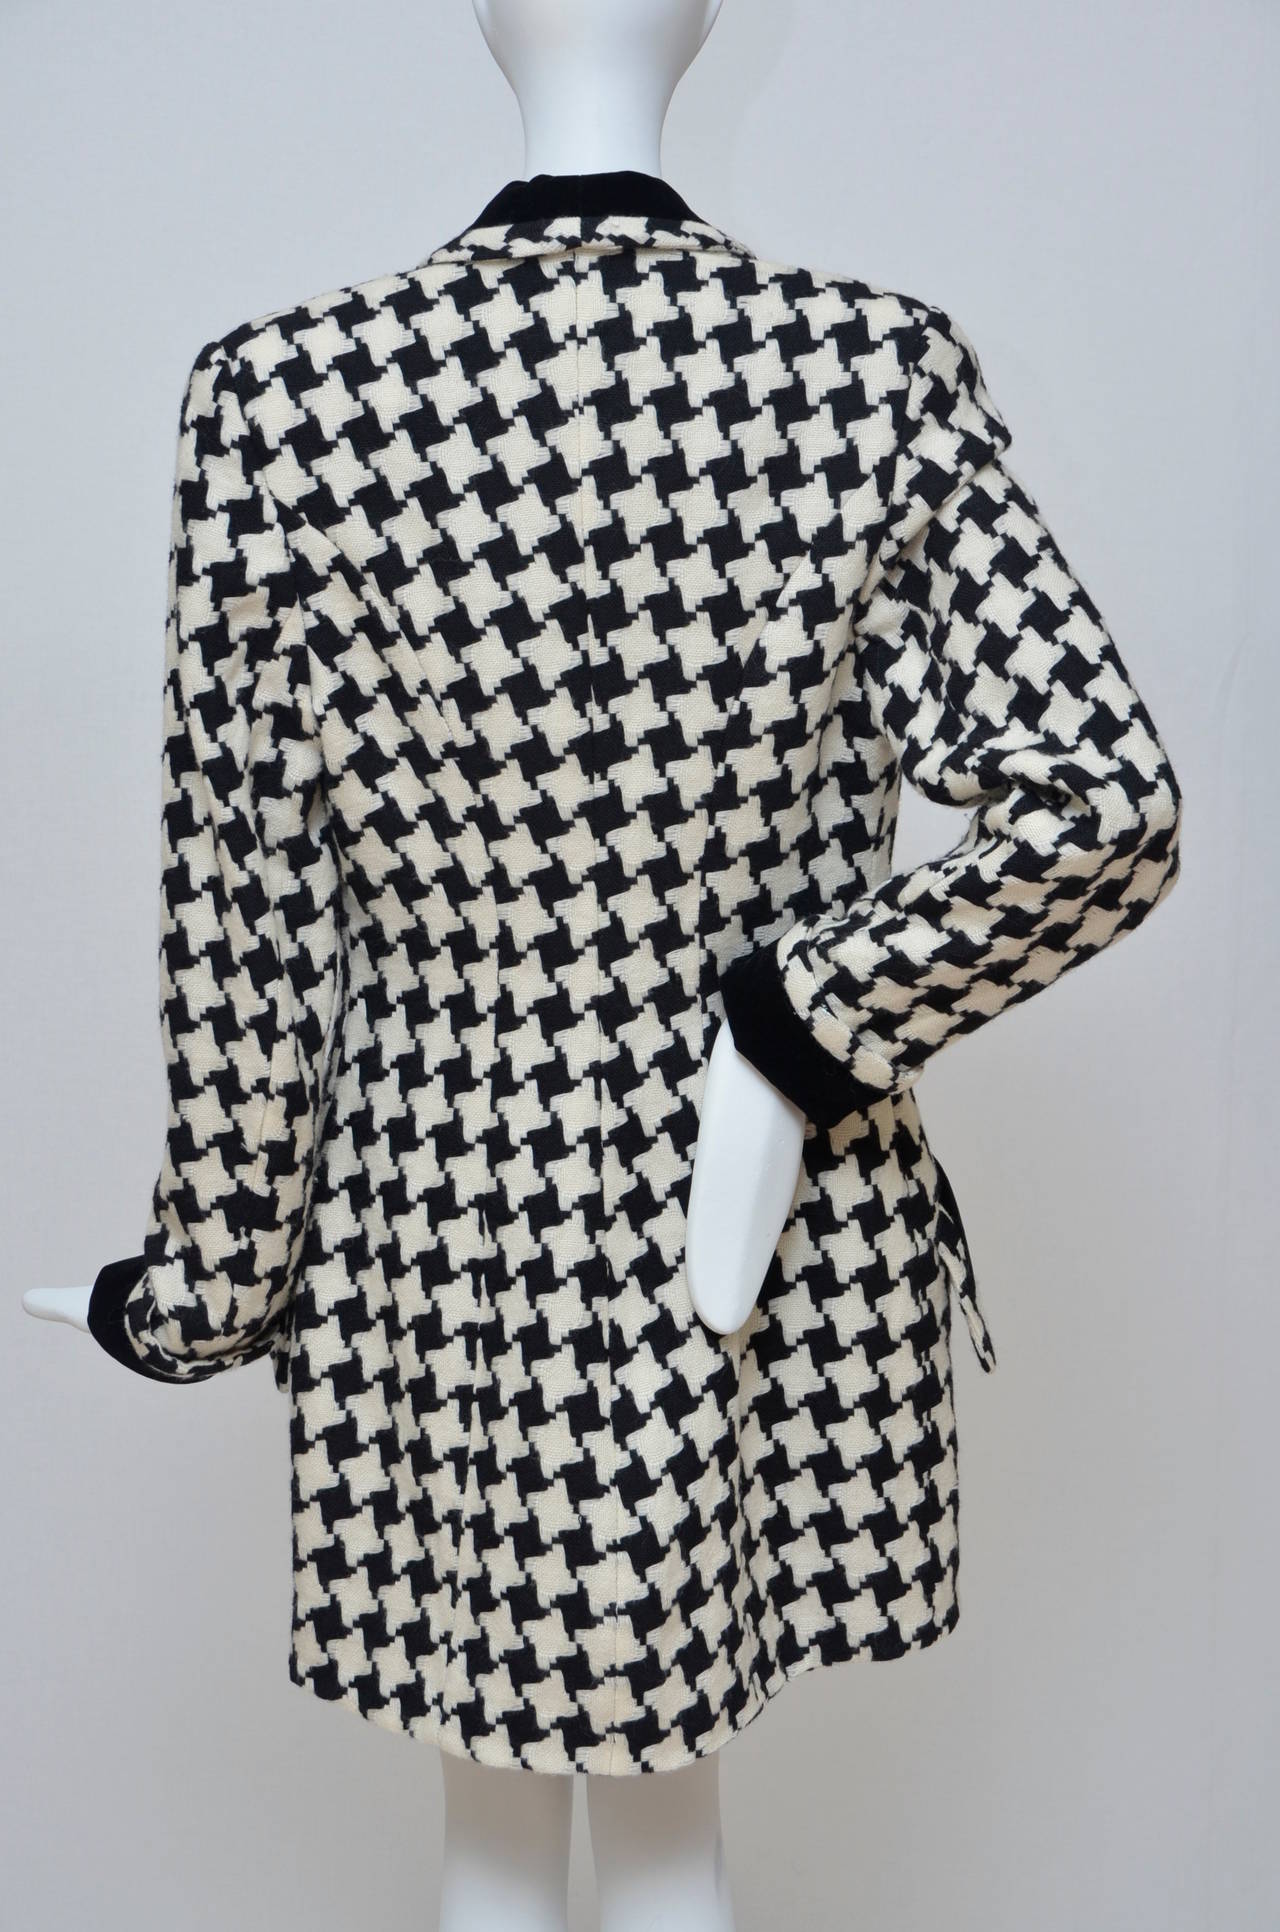 Karl Lagerfeld Houndstooth Blazer Jacket.
Size 10 us but it run small.
Velvet trim on sleeves and collar.
Extra  velvet button included.
Made in West Germany.
Jacket measure:waist 15